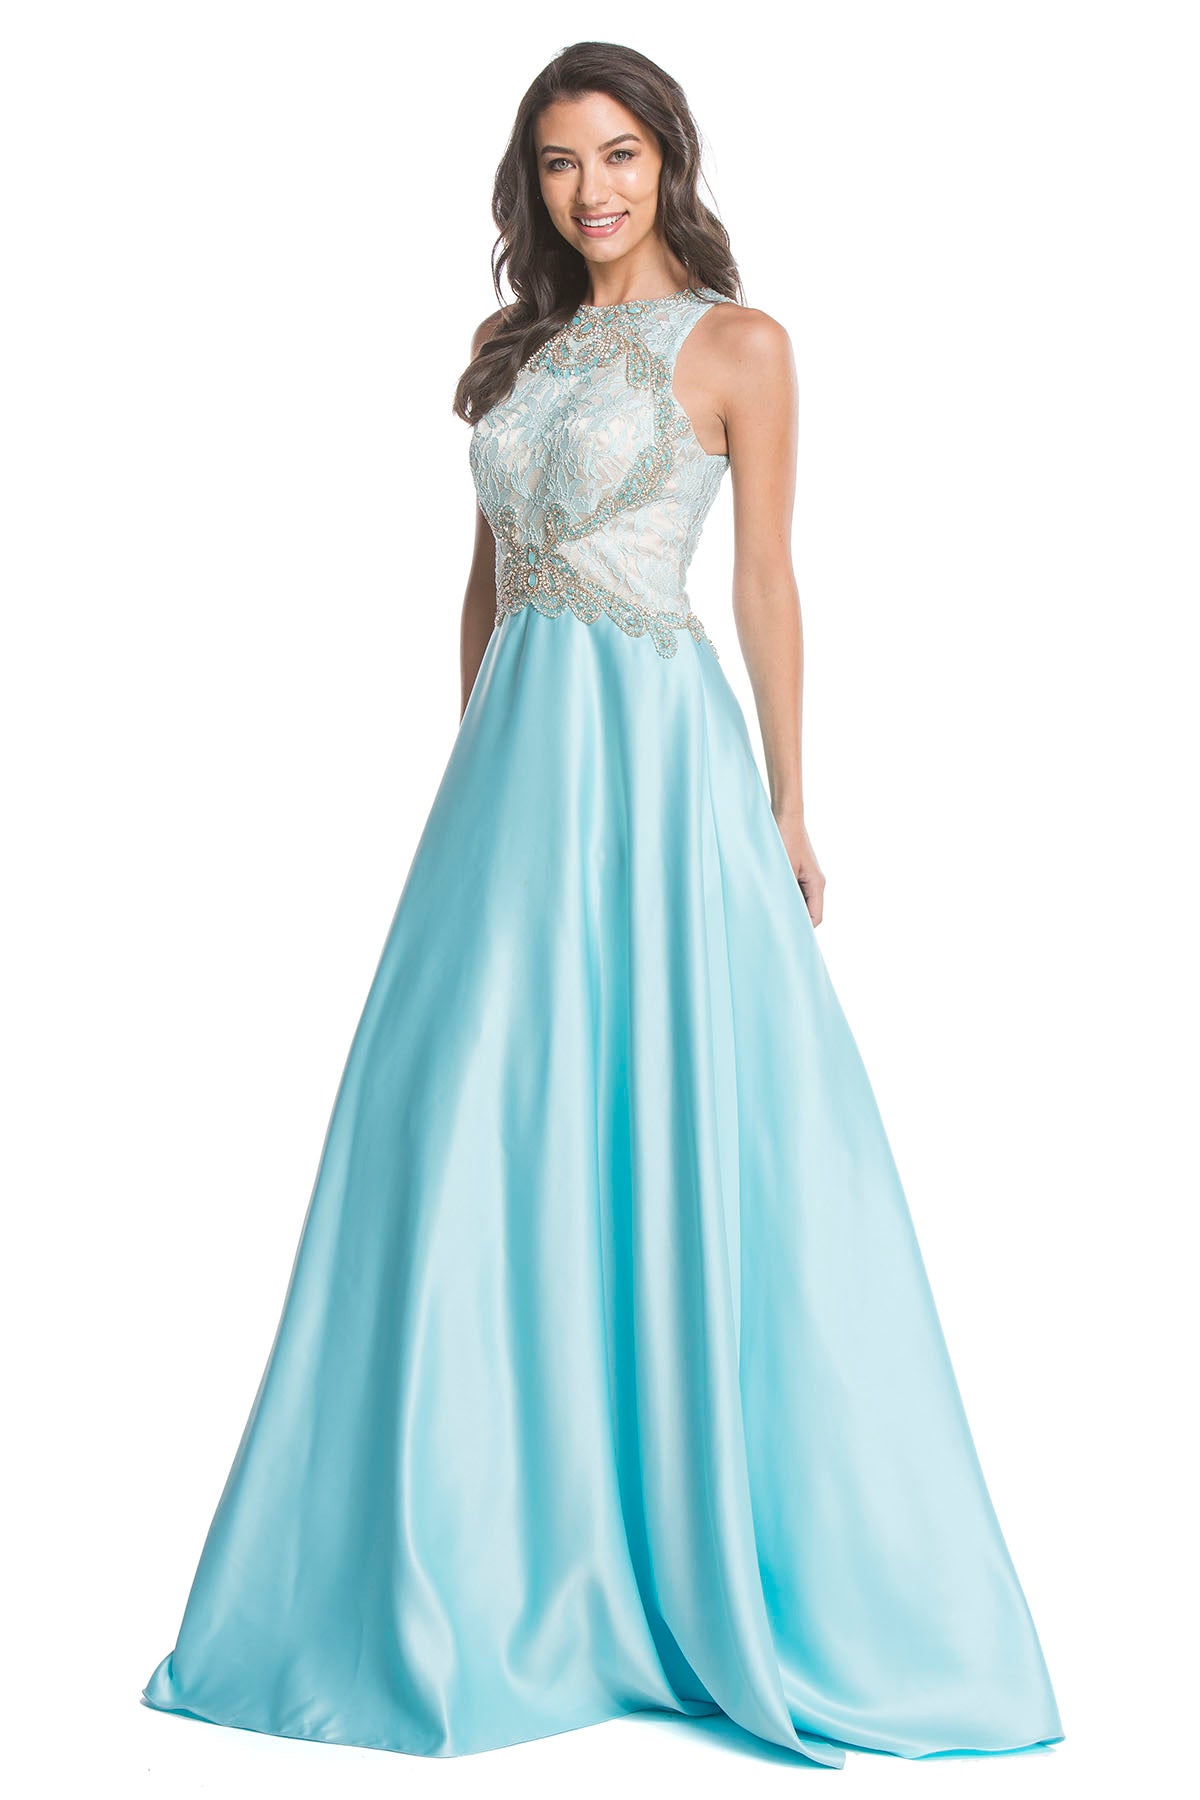 Aspeed Design -L1681 Embellished Ball Gown